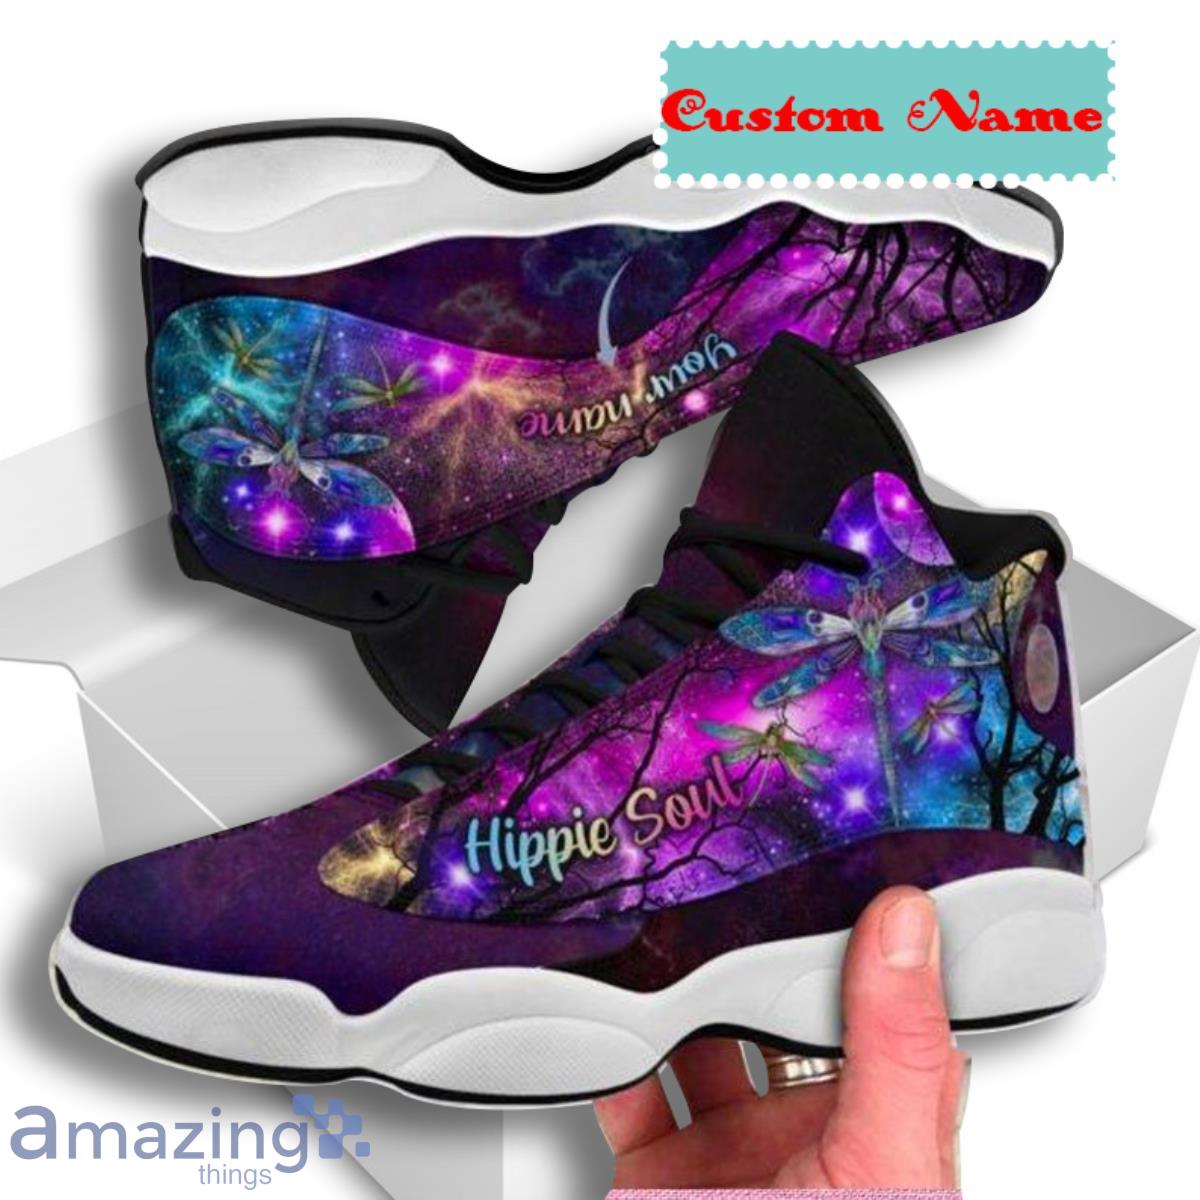 Customized Dragonfly Hippie Soul Air Jordan 13 Custom Name Sneakers Special  Gift For Men And Women